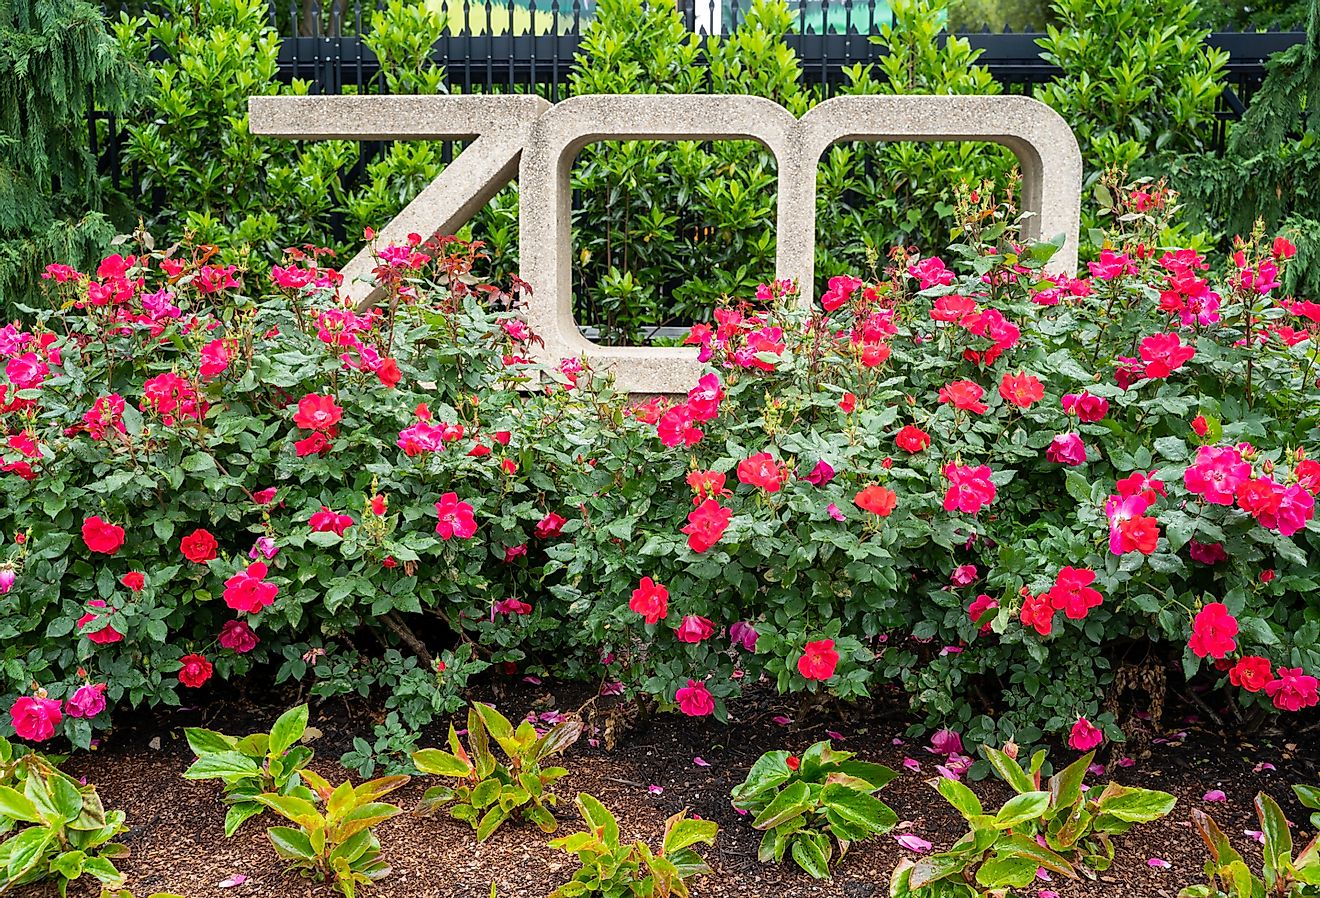 Sign for the Smithsonian National zoo, flowers surround the sign. Image credit melissamn via Shutterstock.